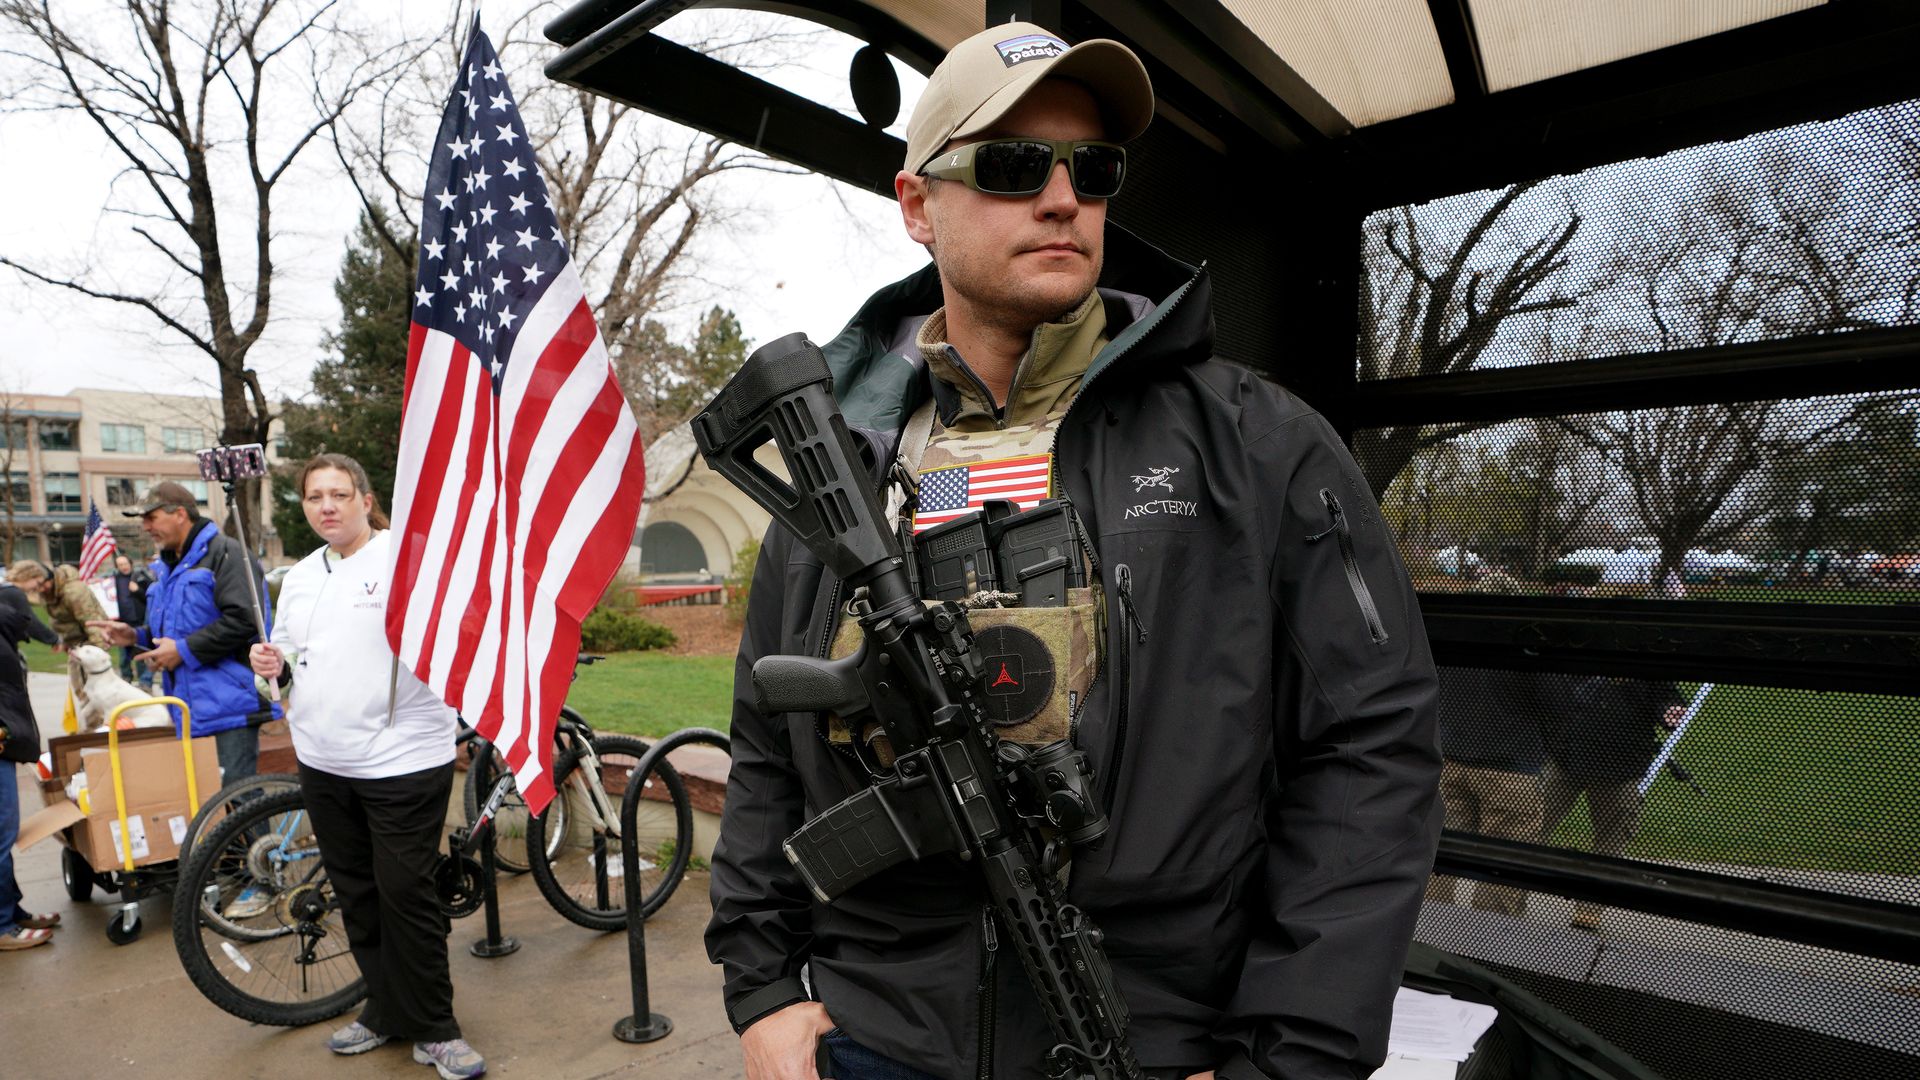 Man stands with an AR-15 rifle slung across his chest with an American flag in the background